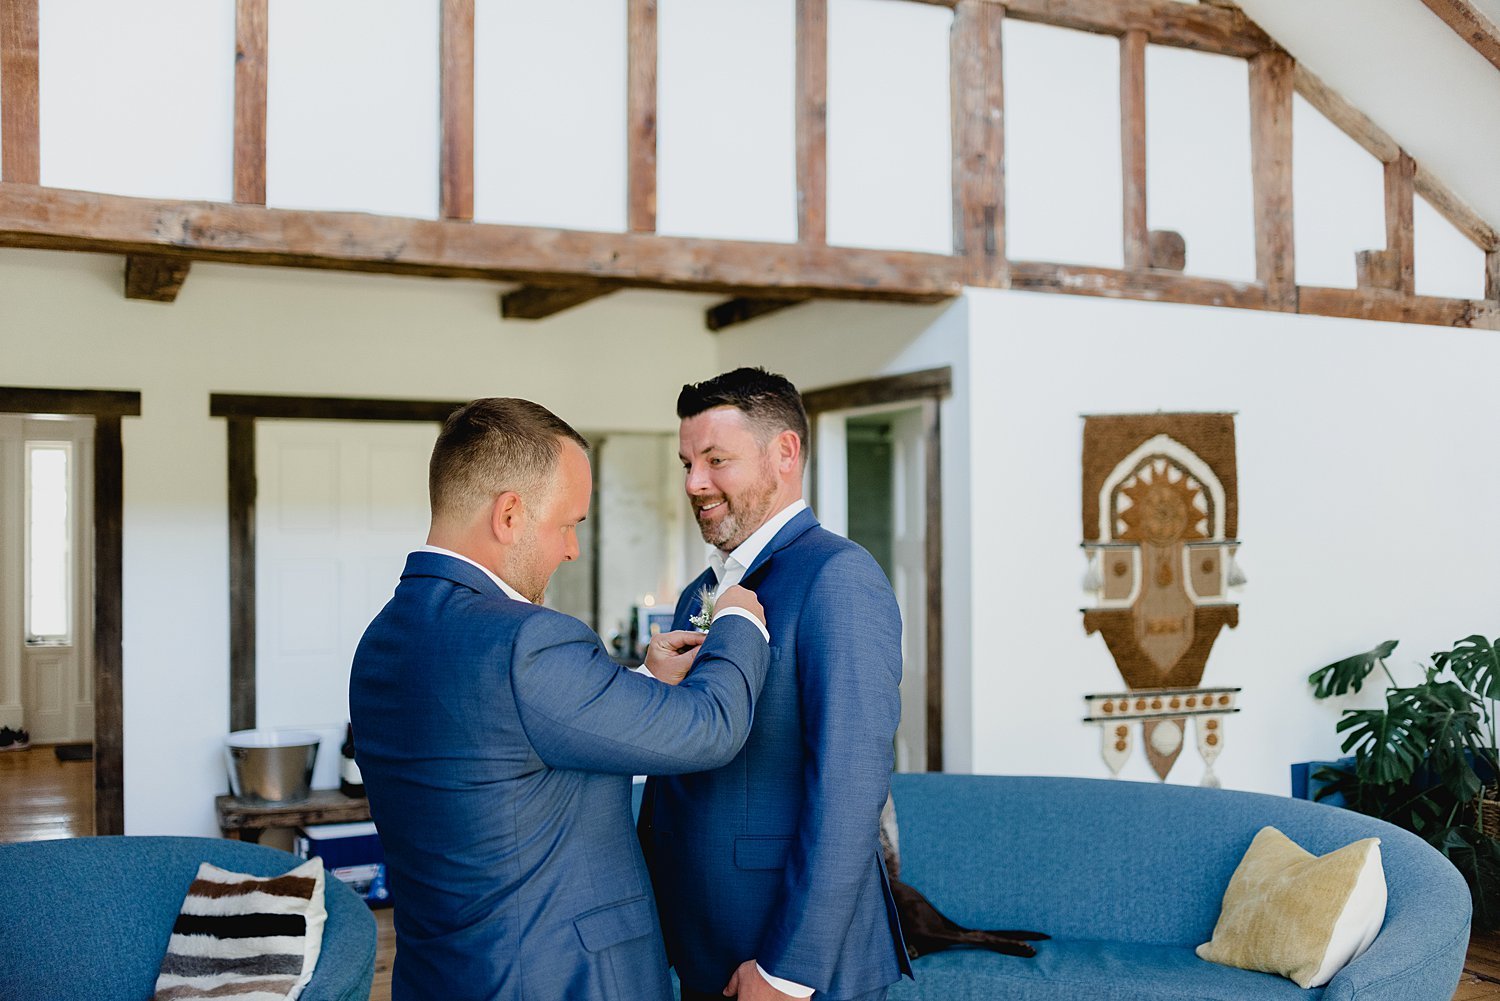 An Intimate Elopement at an Airbnb in Prince Edward County | Prince Edward County Wedding Photographer | Holly McMurter Photographs_0007.jpg